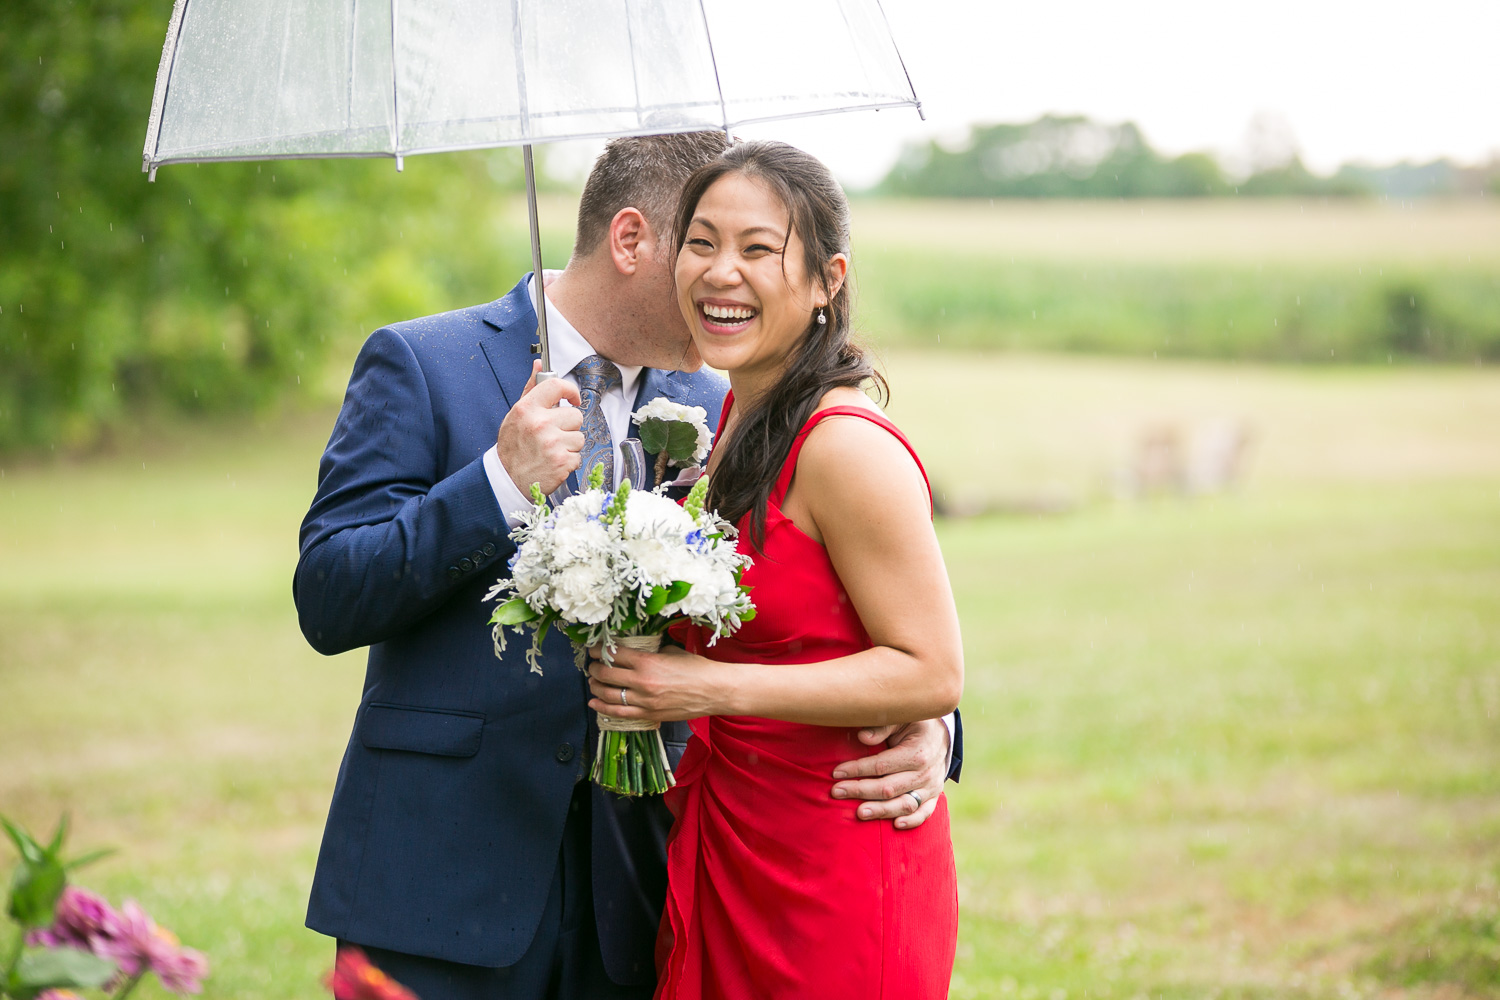 Smiling bride and groom on rainy wedding day